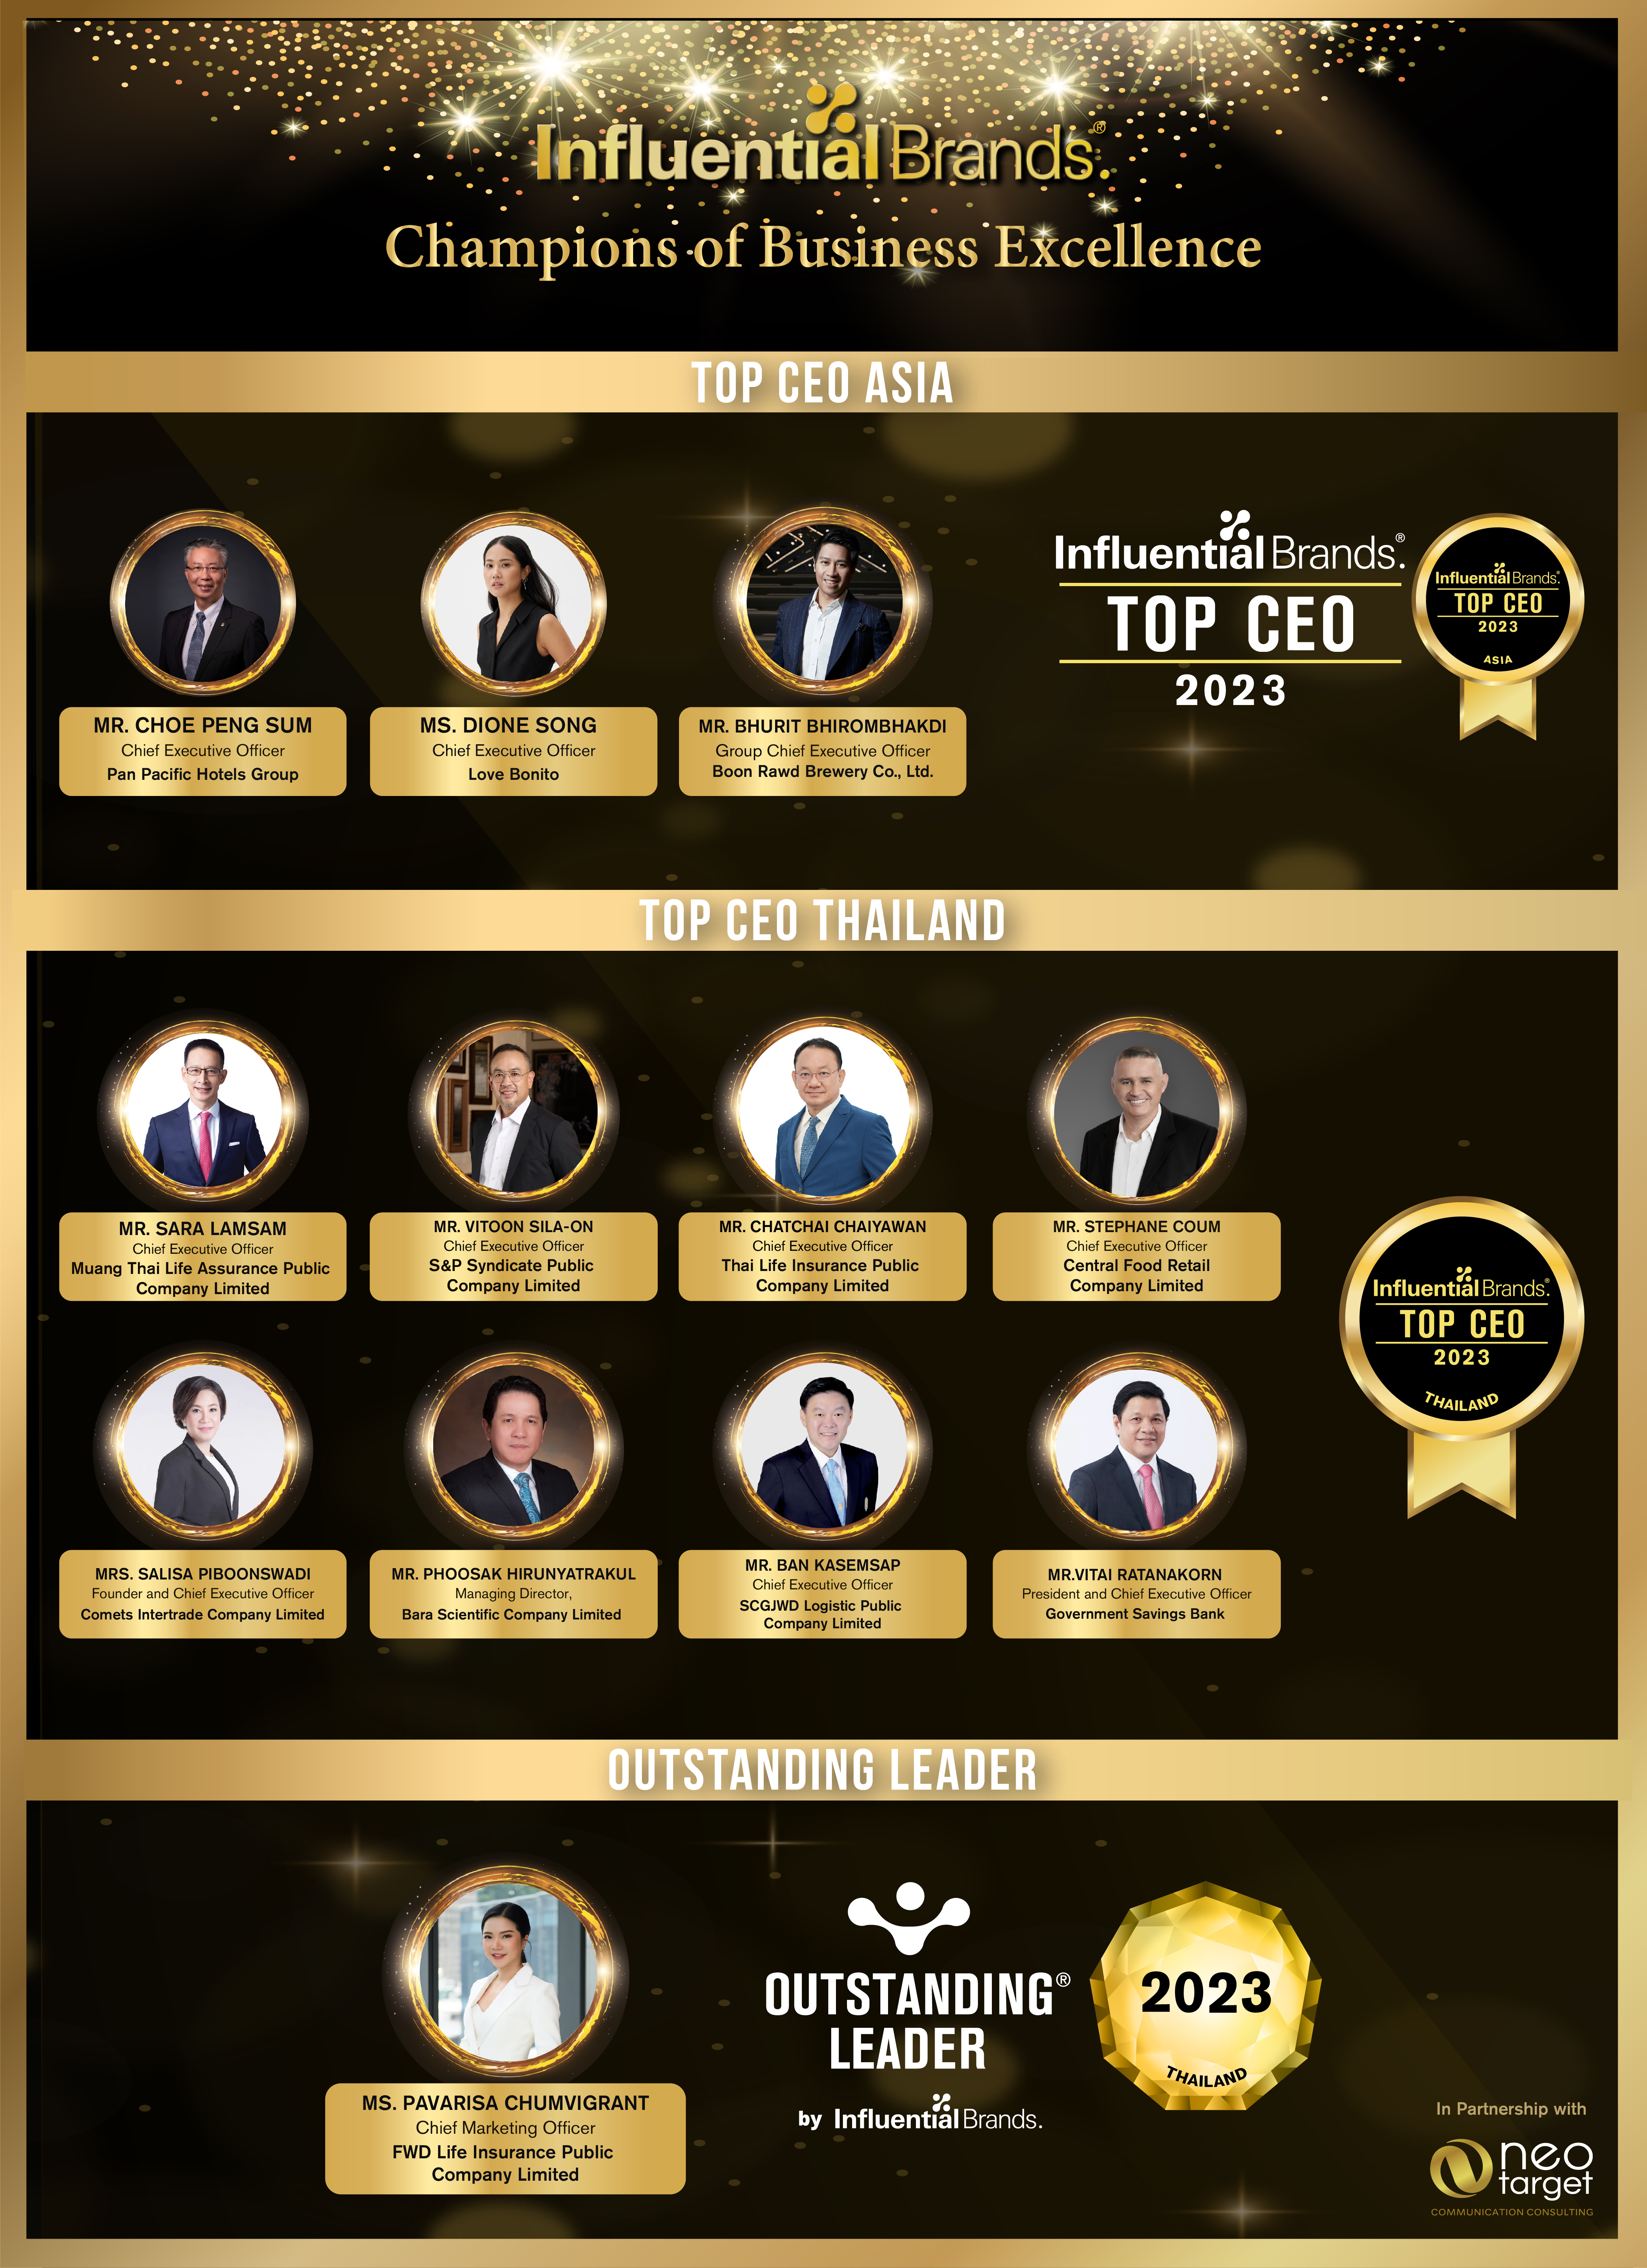 Top CEO Winners from Asia, Thailand and Outstanding Leaders from Thailand